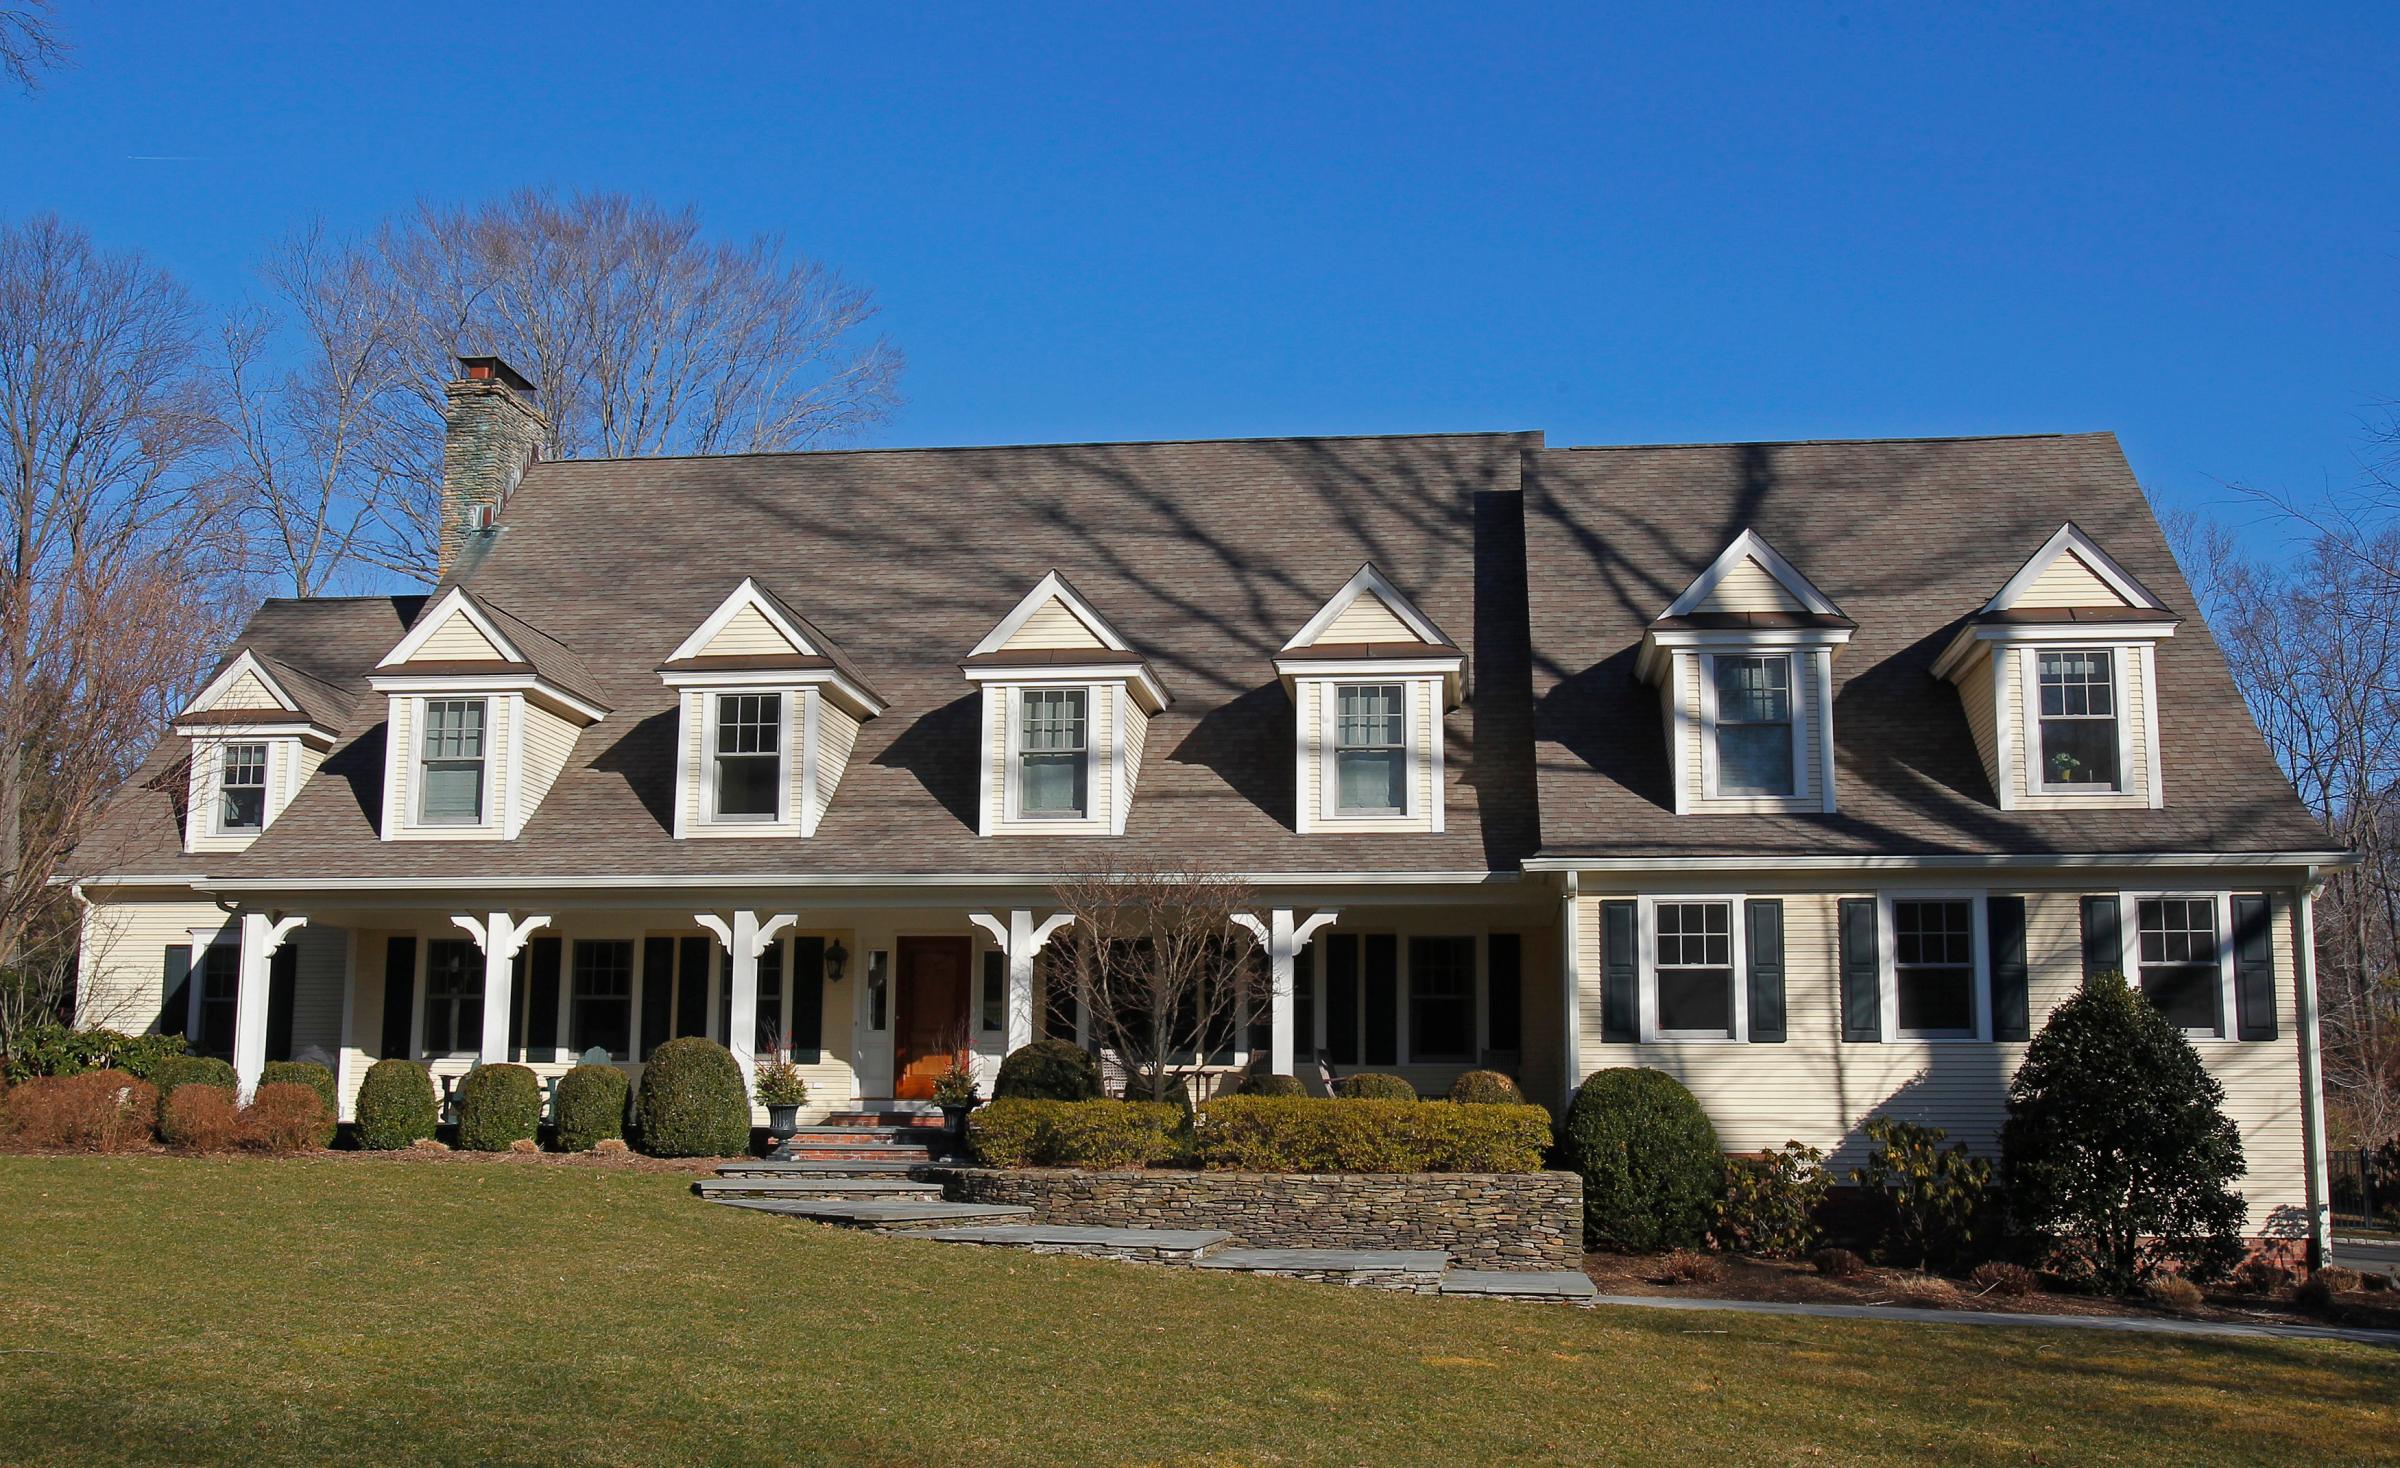 The home of Morgan Stanley investment banker, William Bryan Jennings, is seen at 39 Knollwood Lane in Darien